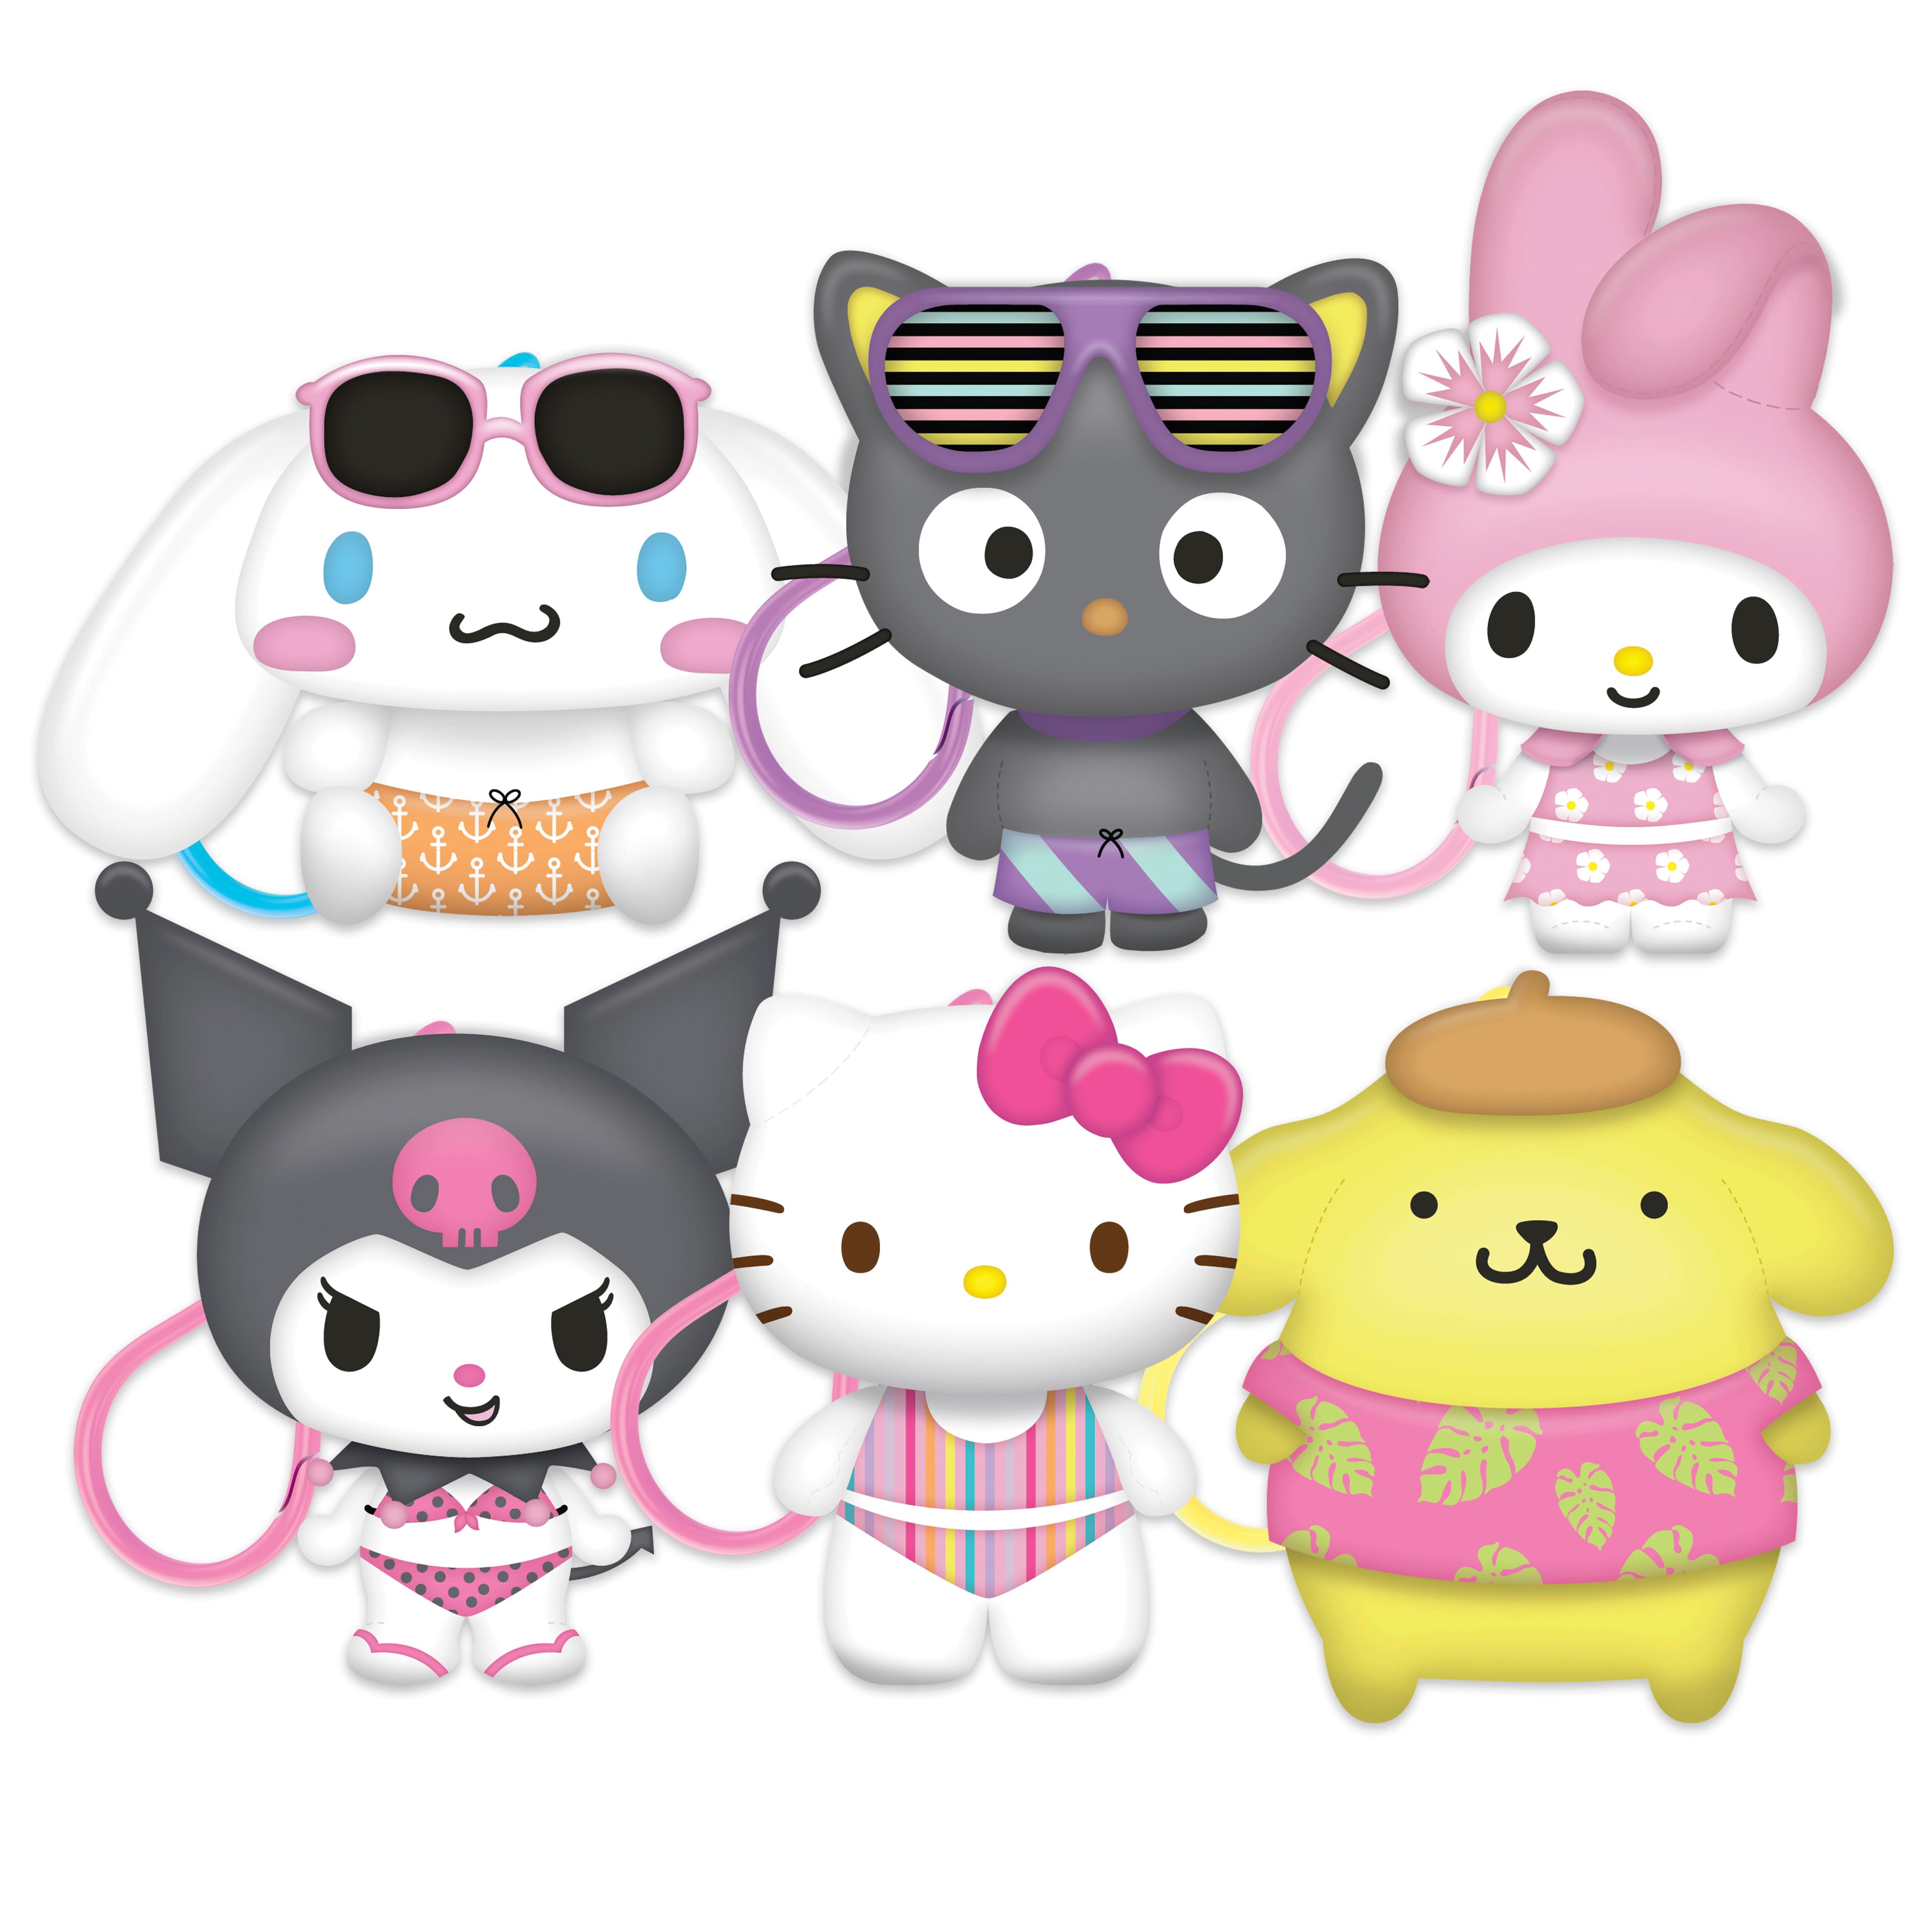 Cute, pink & BACK IN STOCK! Get these limited-edition Hello Kitty